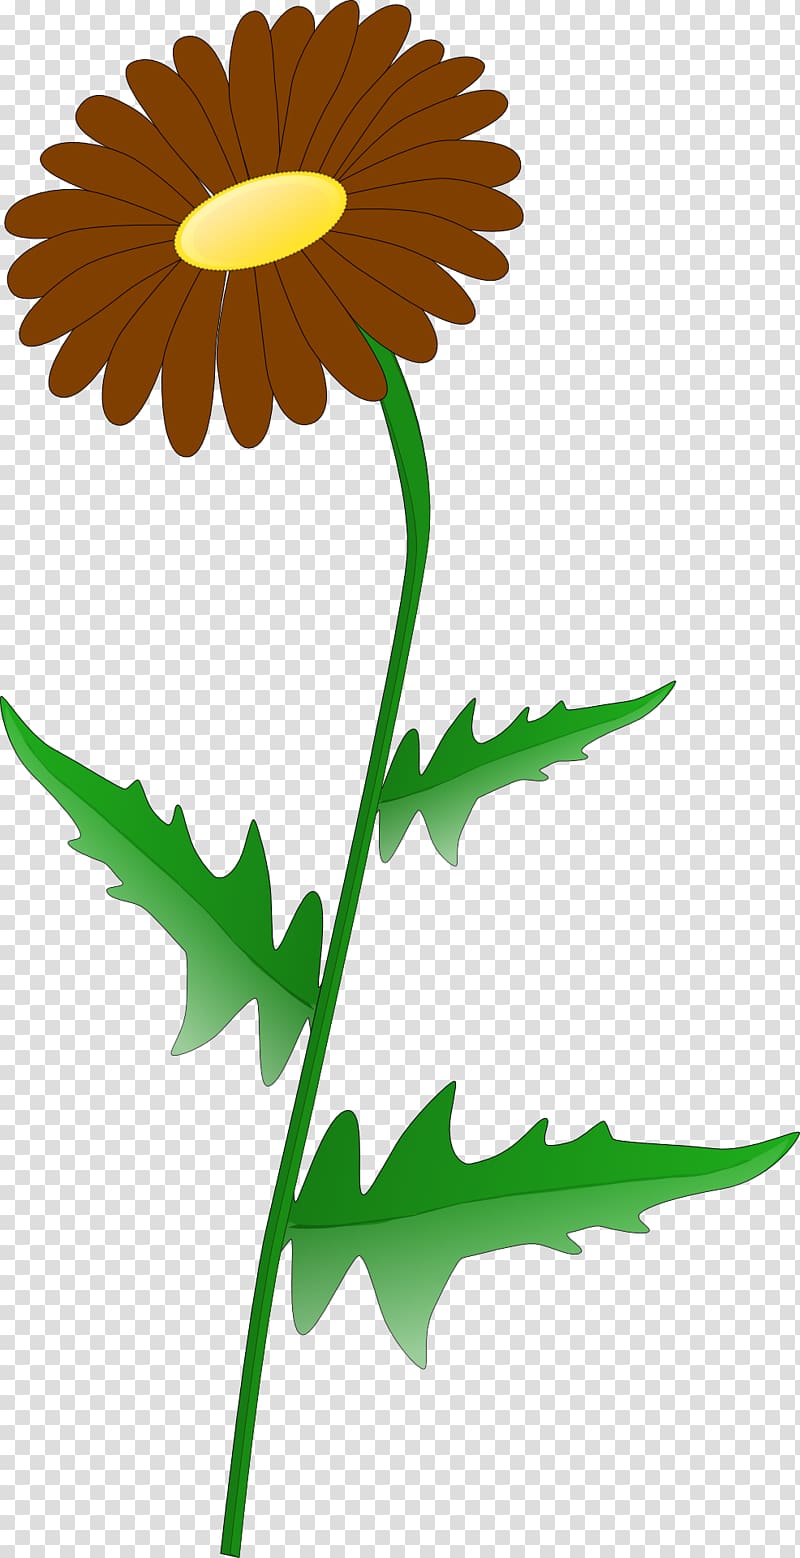 Greenery border transparent background PNG clipart.